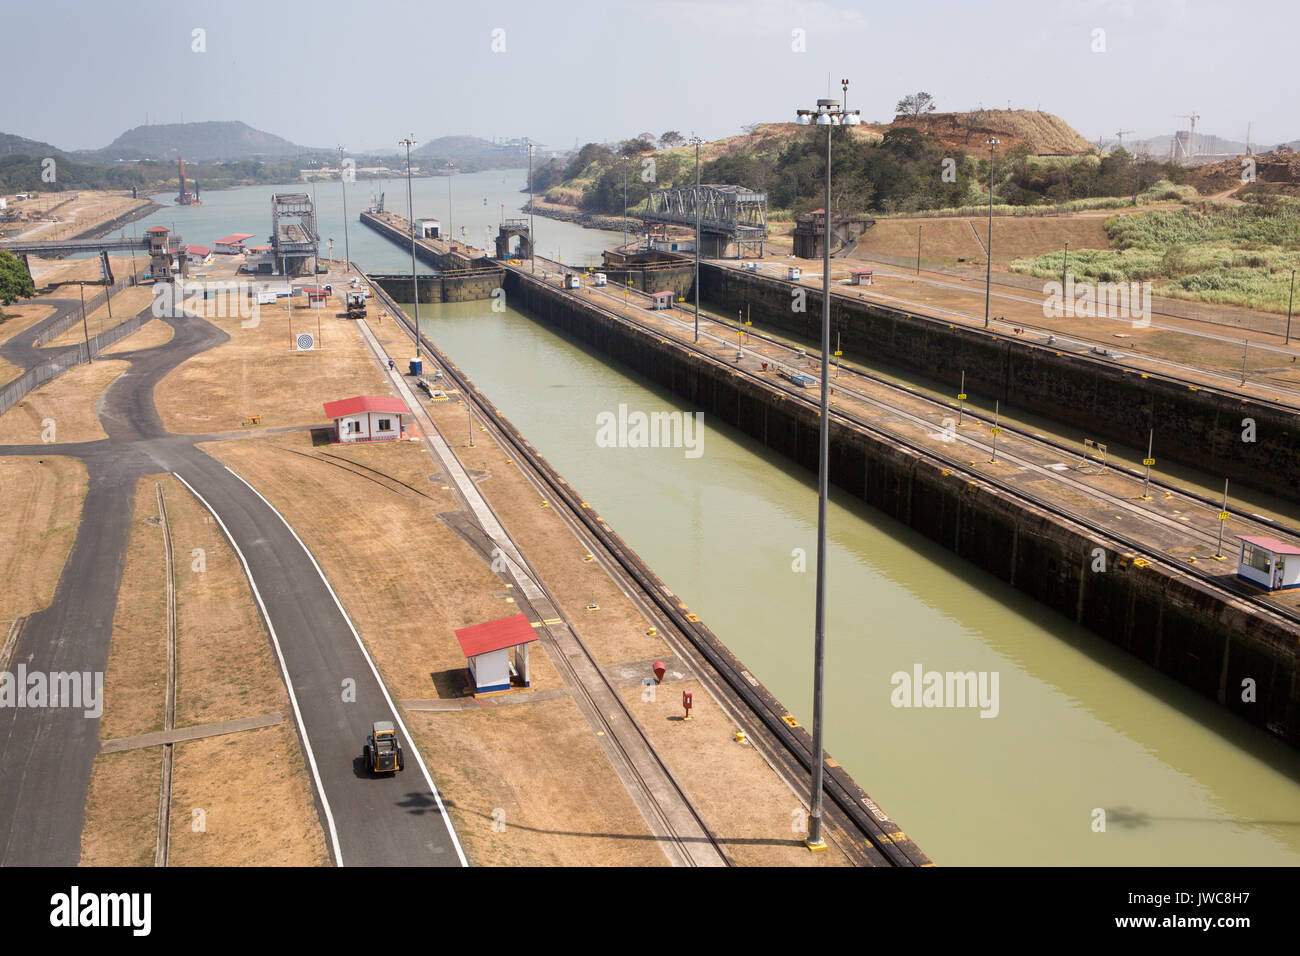 The Miraflores Locks of the Panama Canal leading to the Gulf of Panama and the Pacific Ocean entrance. Stock Photo